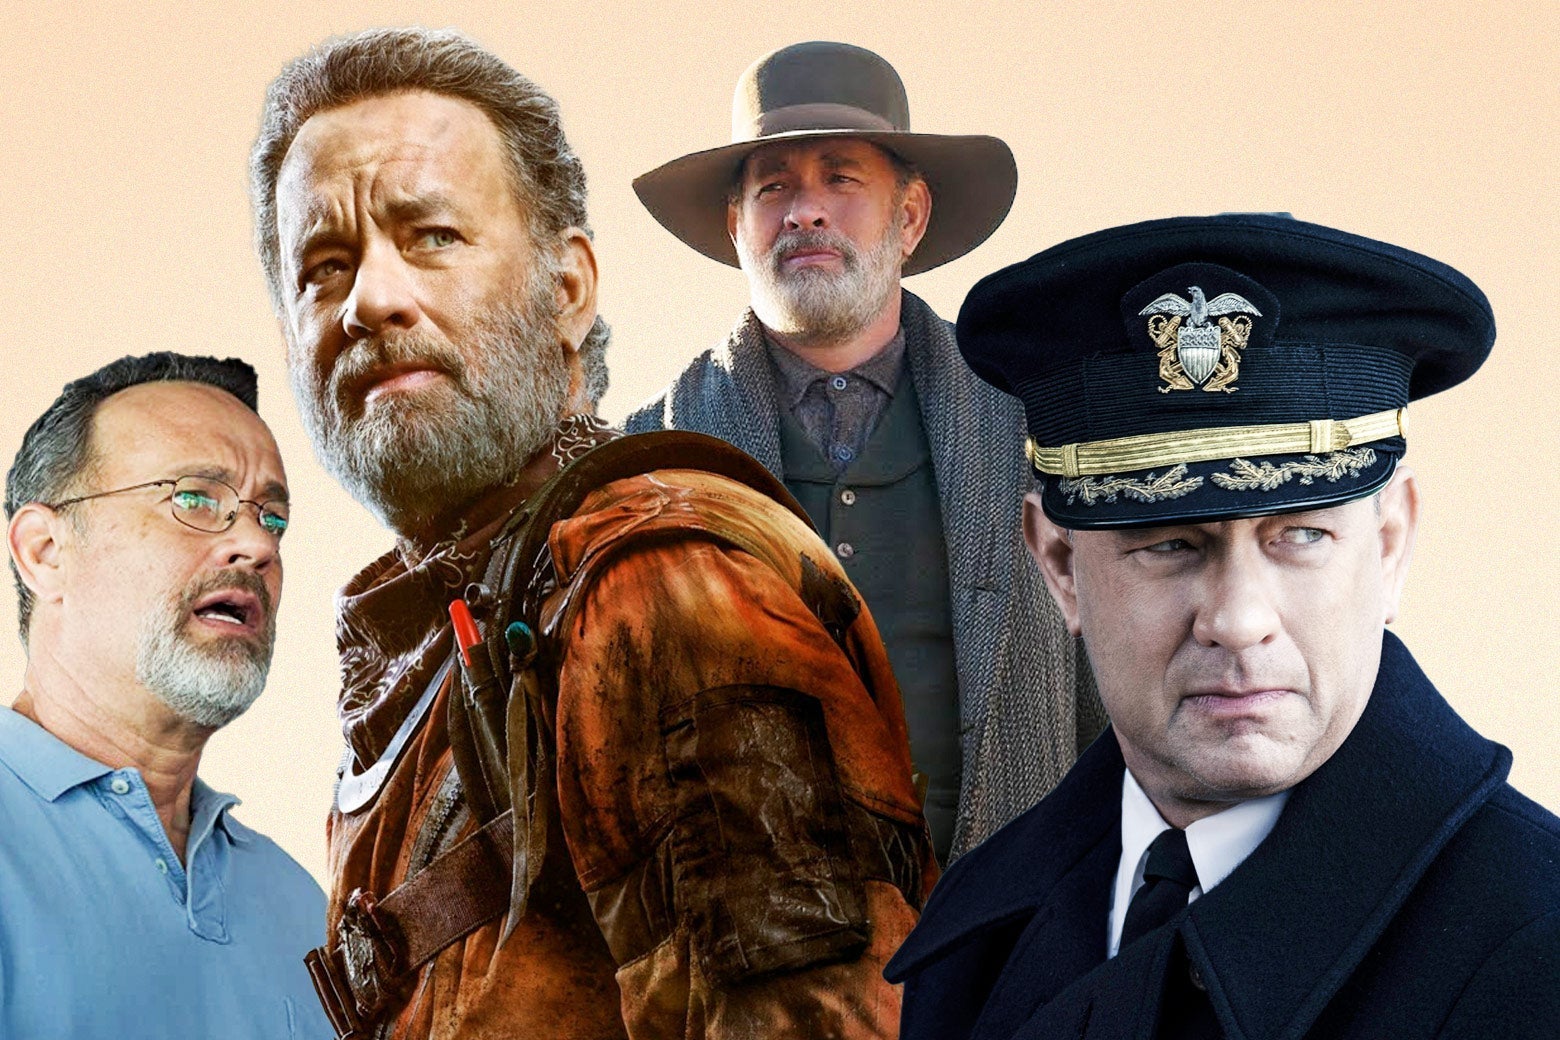 Tom Hanks in Captain Phillips, Finch, News of the World, and Greyhound.